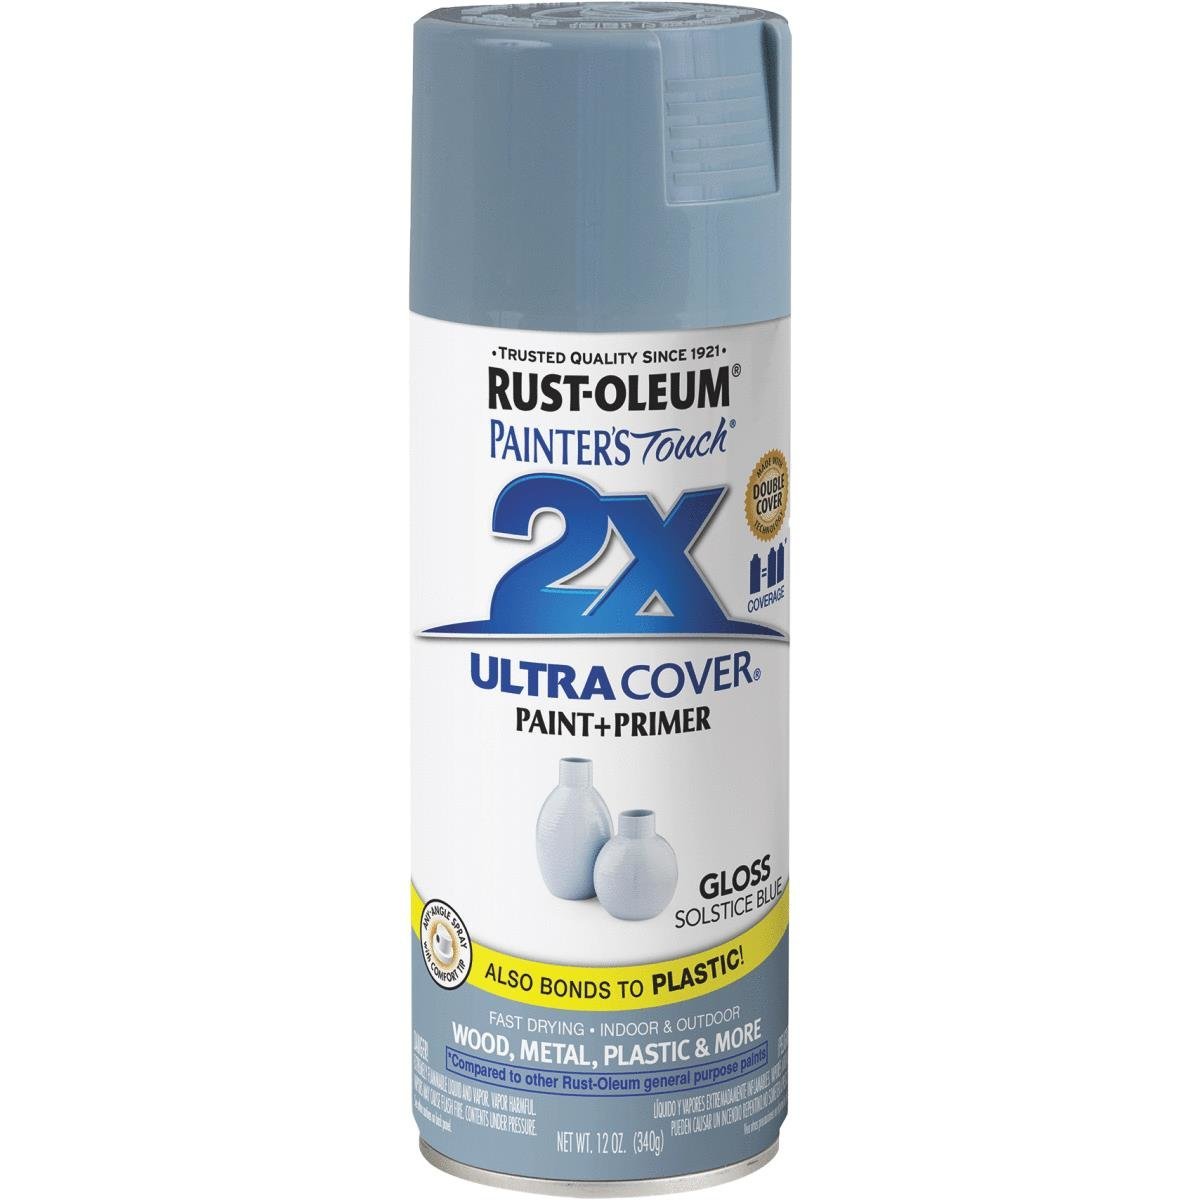 Rust-Oleum 342060 Painters Touch 2X Ultra Cover Spray 12 Oz, Gloss Solstice Blue